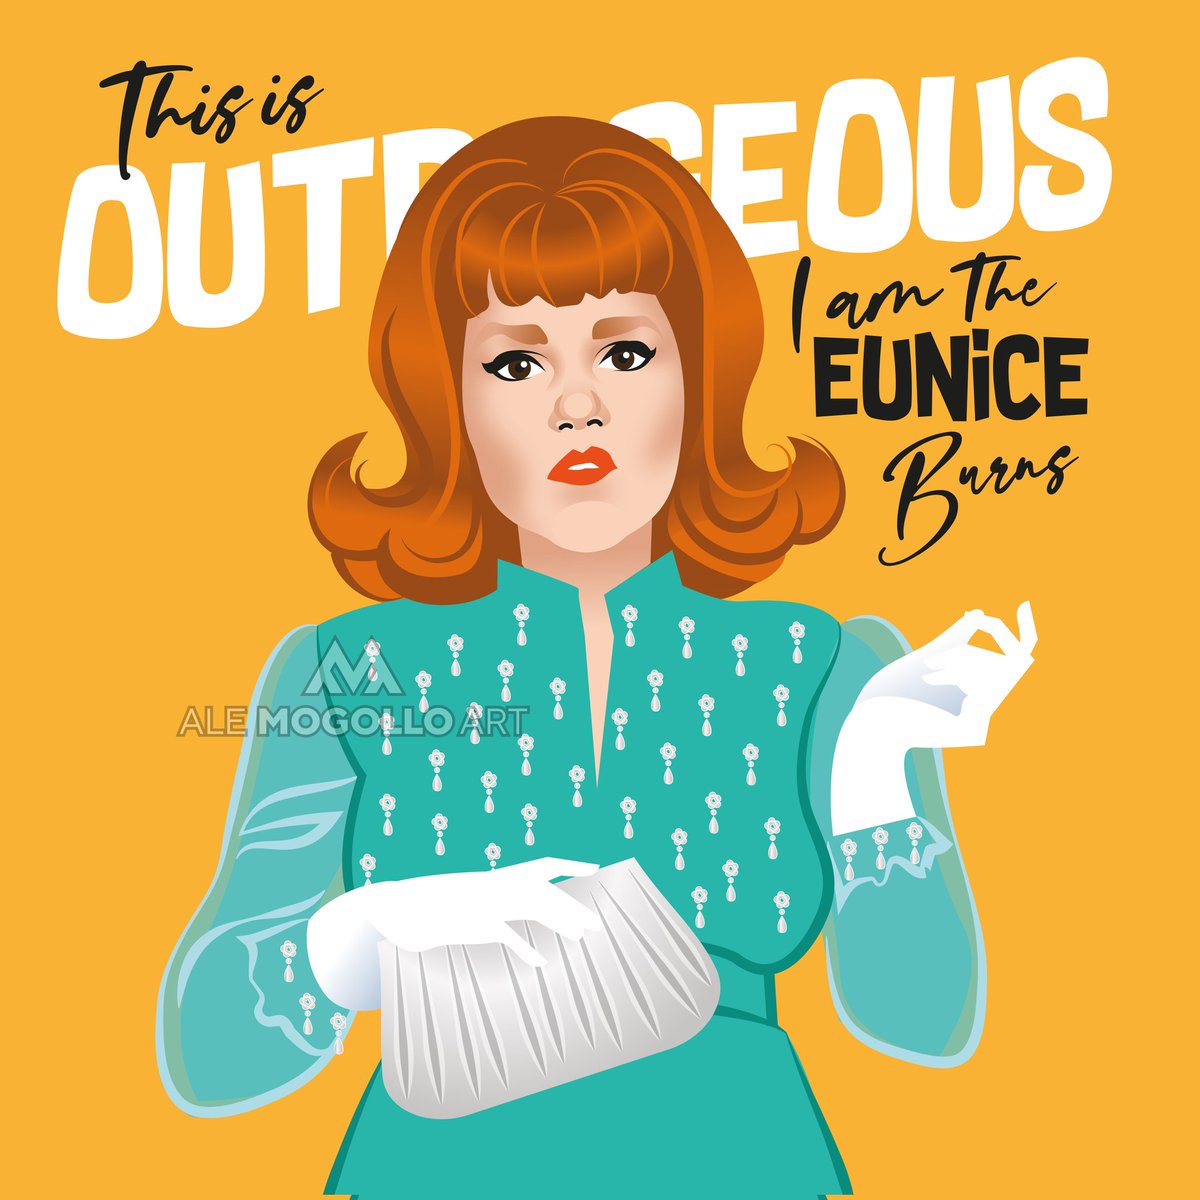 #MondayMood
The irrepressible Eunice Burns as played by the wonderful Madeline Kahn in Peter Bogdanovich's masterpiece What’s up doc?
#madelinekahn #eunice #whatsupdoc #comedy #humor #alejandromogolloart